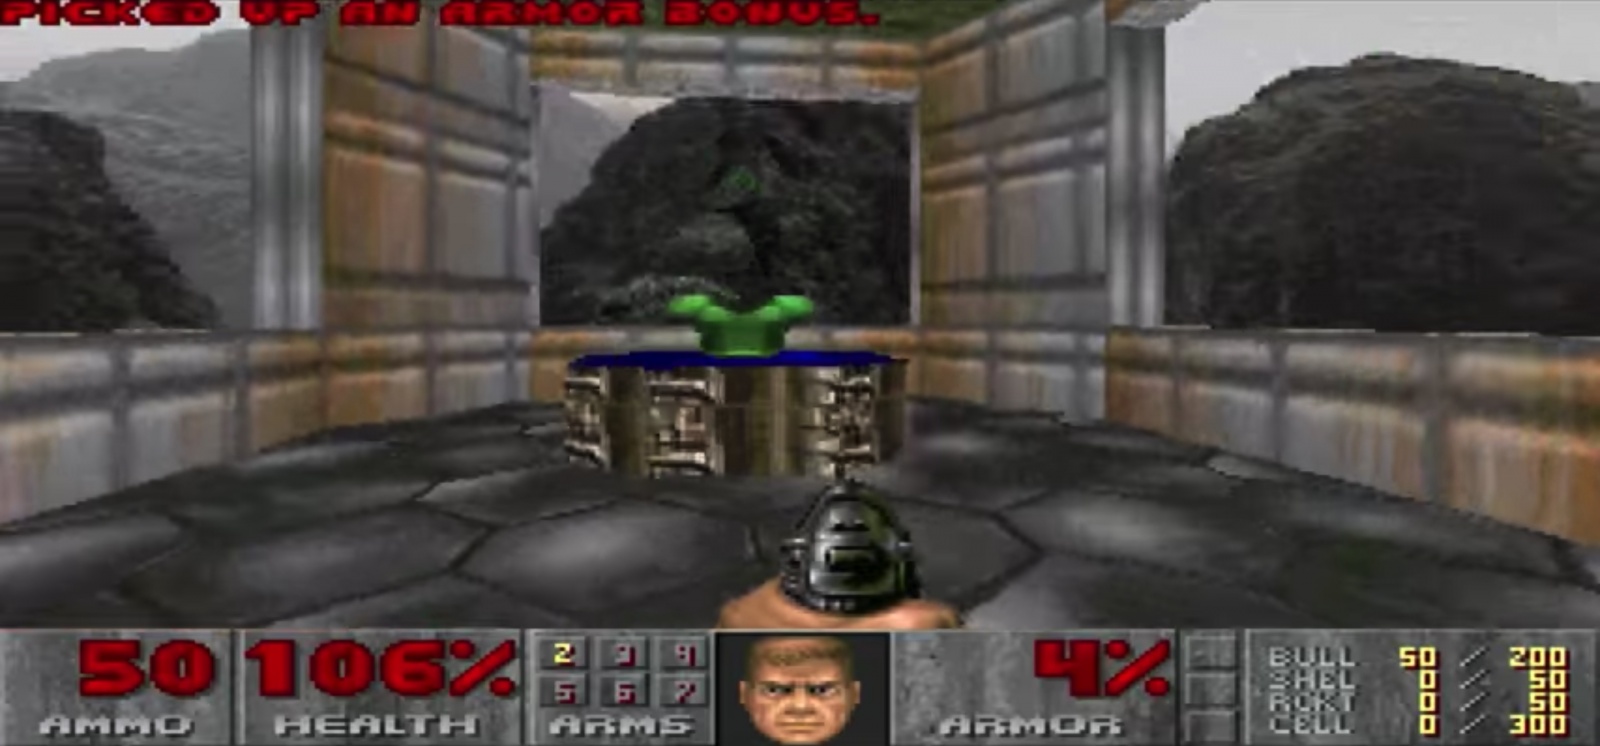 Levelord, an Ordinary Moscow Resident: Interview with the Creator of Duke Nukem - 4